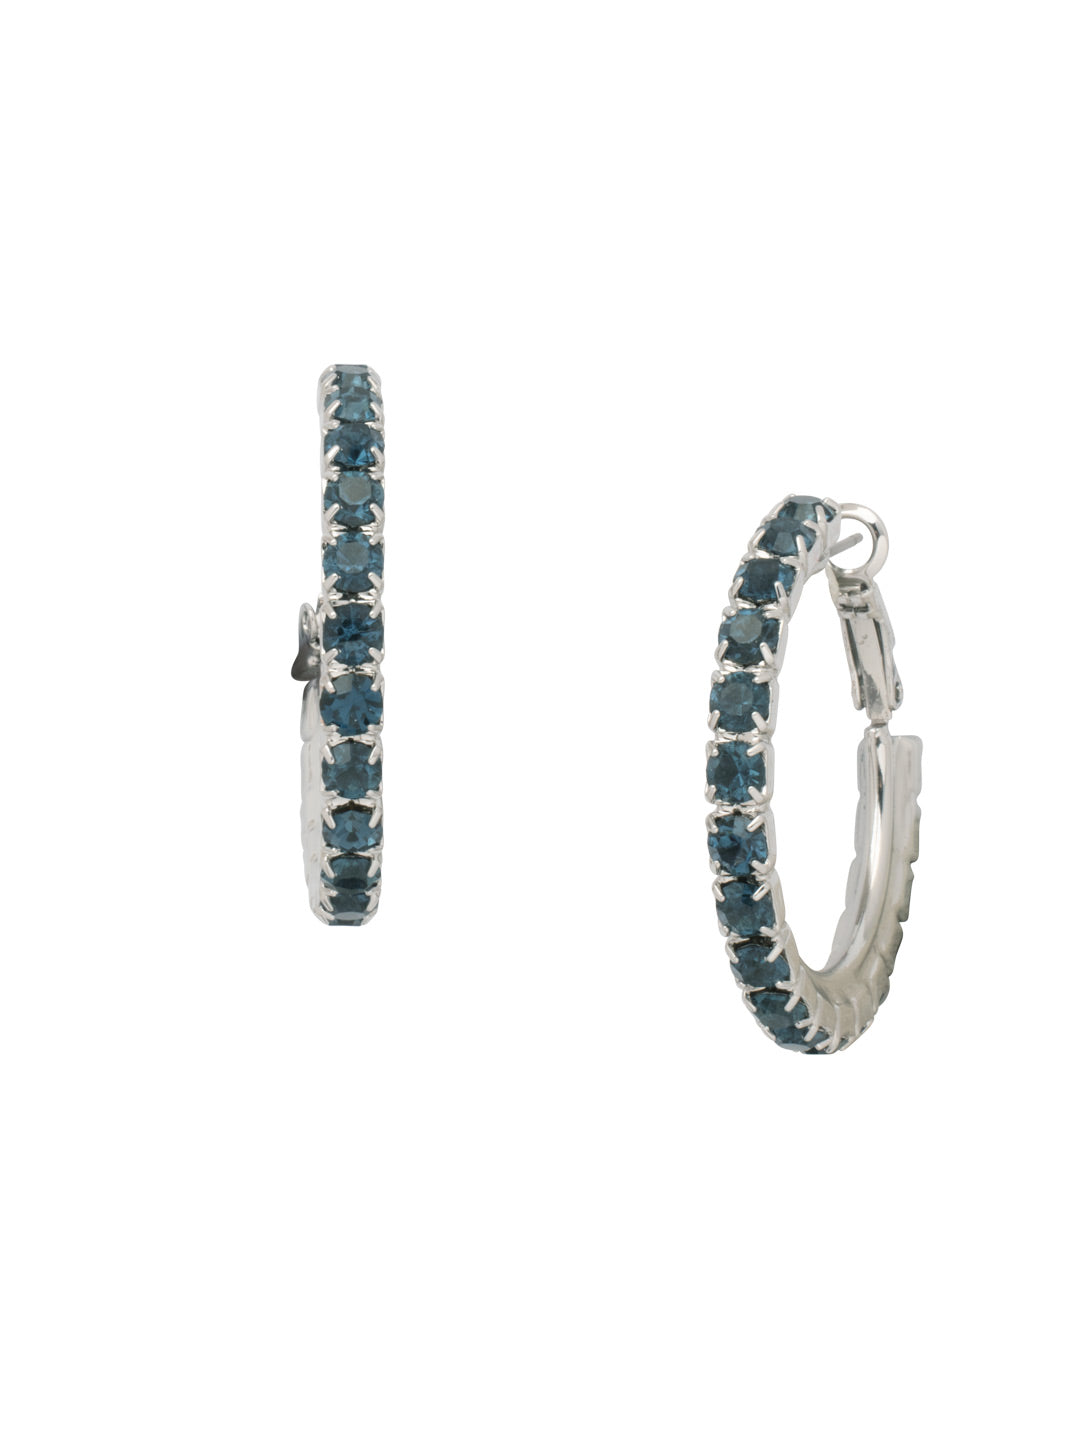 Amber Hoop Earrings - EFL20PDASP - <p>The Amber Hoop Earrings feature a crystal-embellished metal hoop. From Sorrelli's Aspen SKY collection in our Palladium finish.</p>